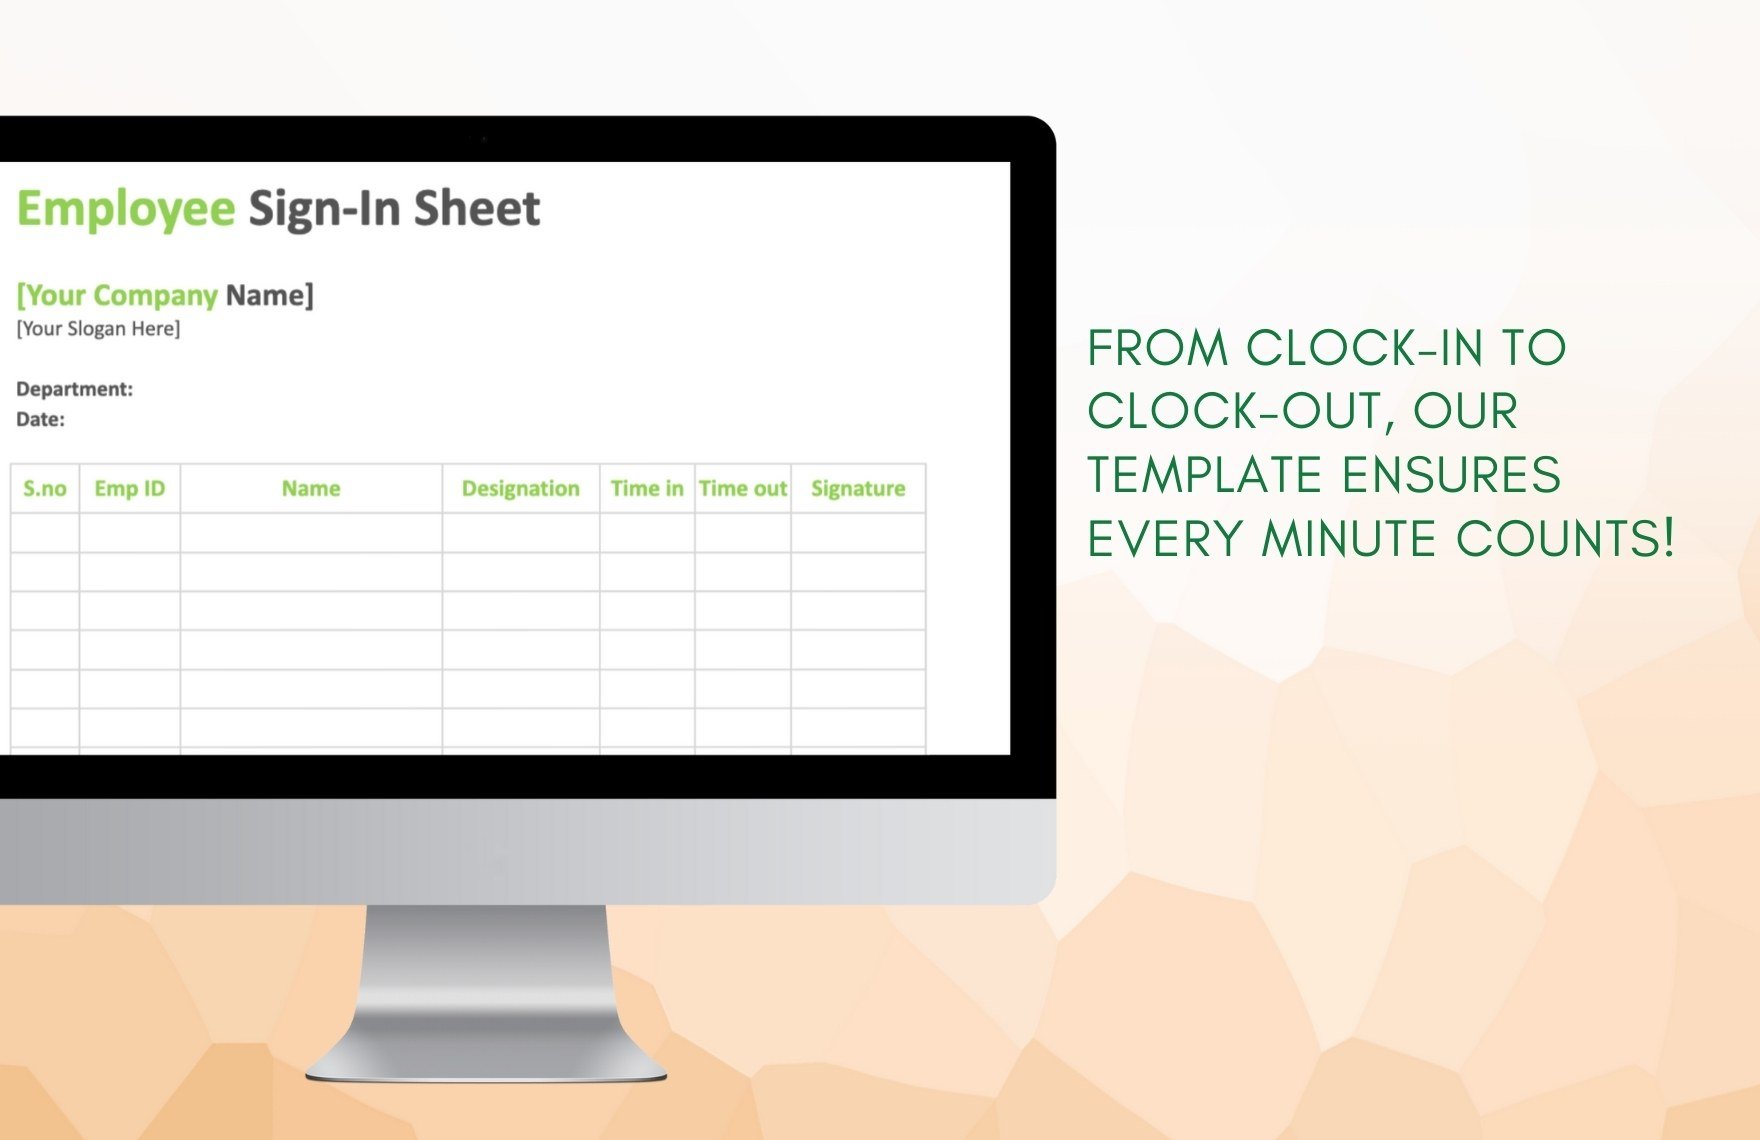 Employee Sign in Sheet Template